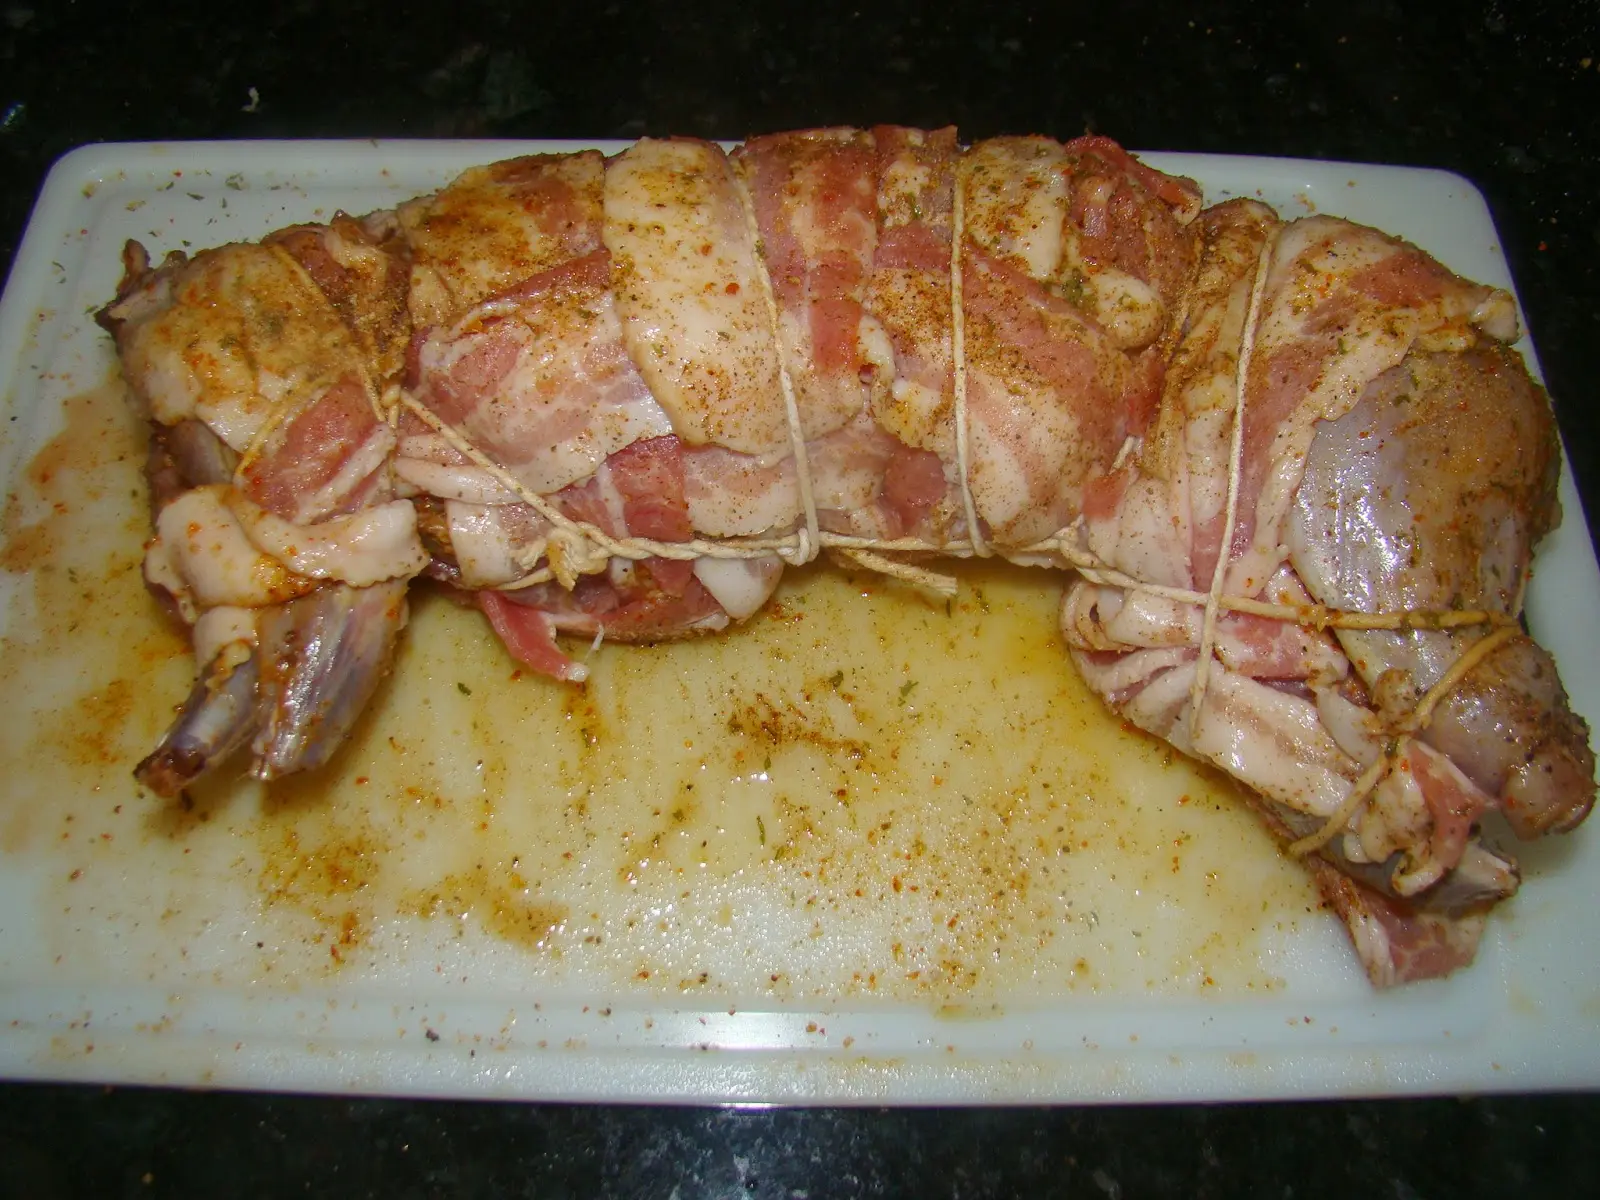 smoked rabbit wrapped in bacon - Do you need to soak rabbit before cooking